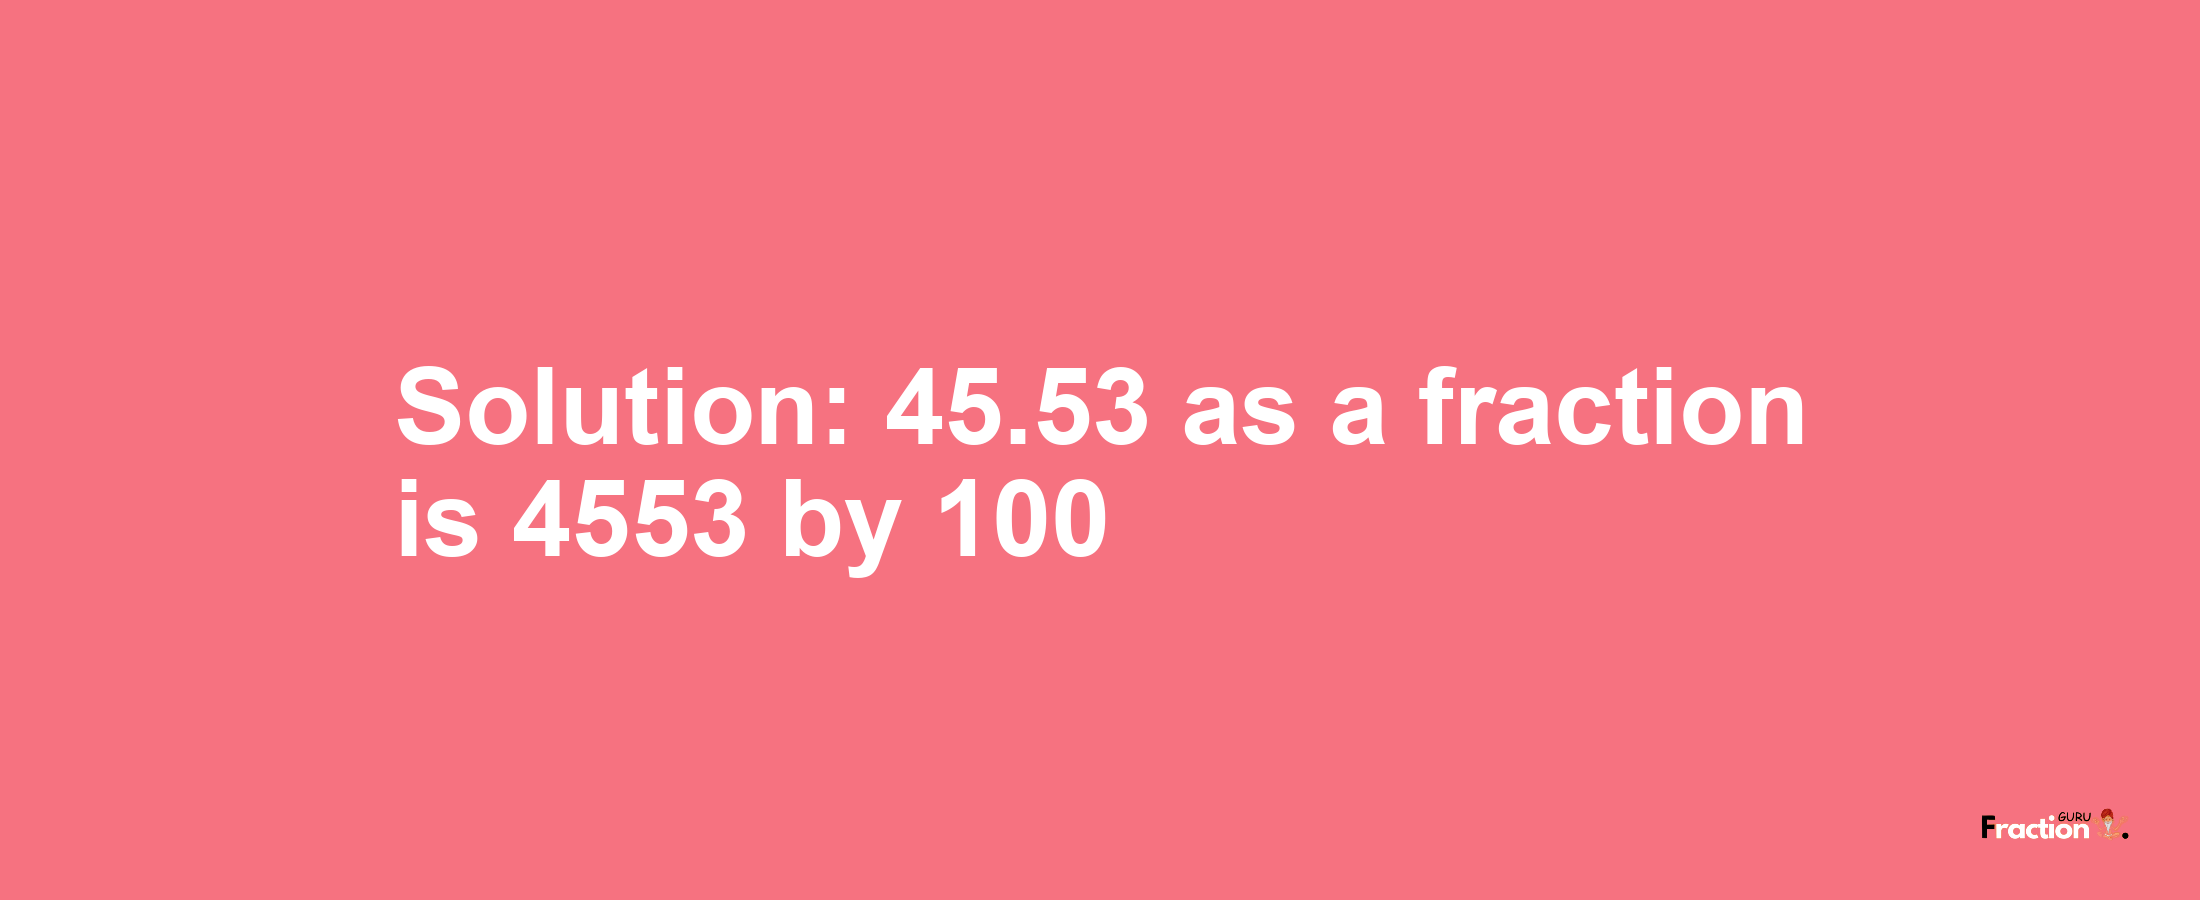 Solution:45.53 as a fraction is 4553/100